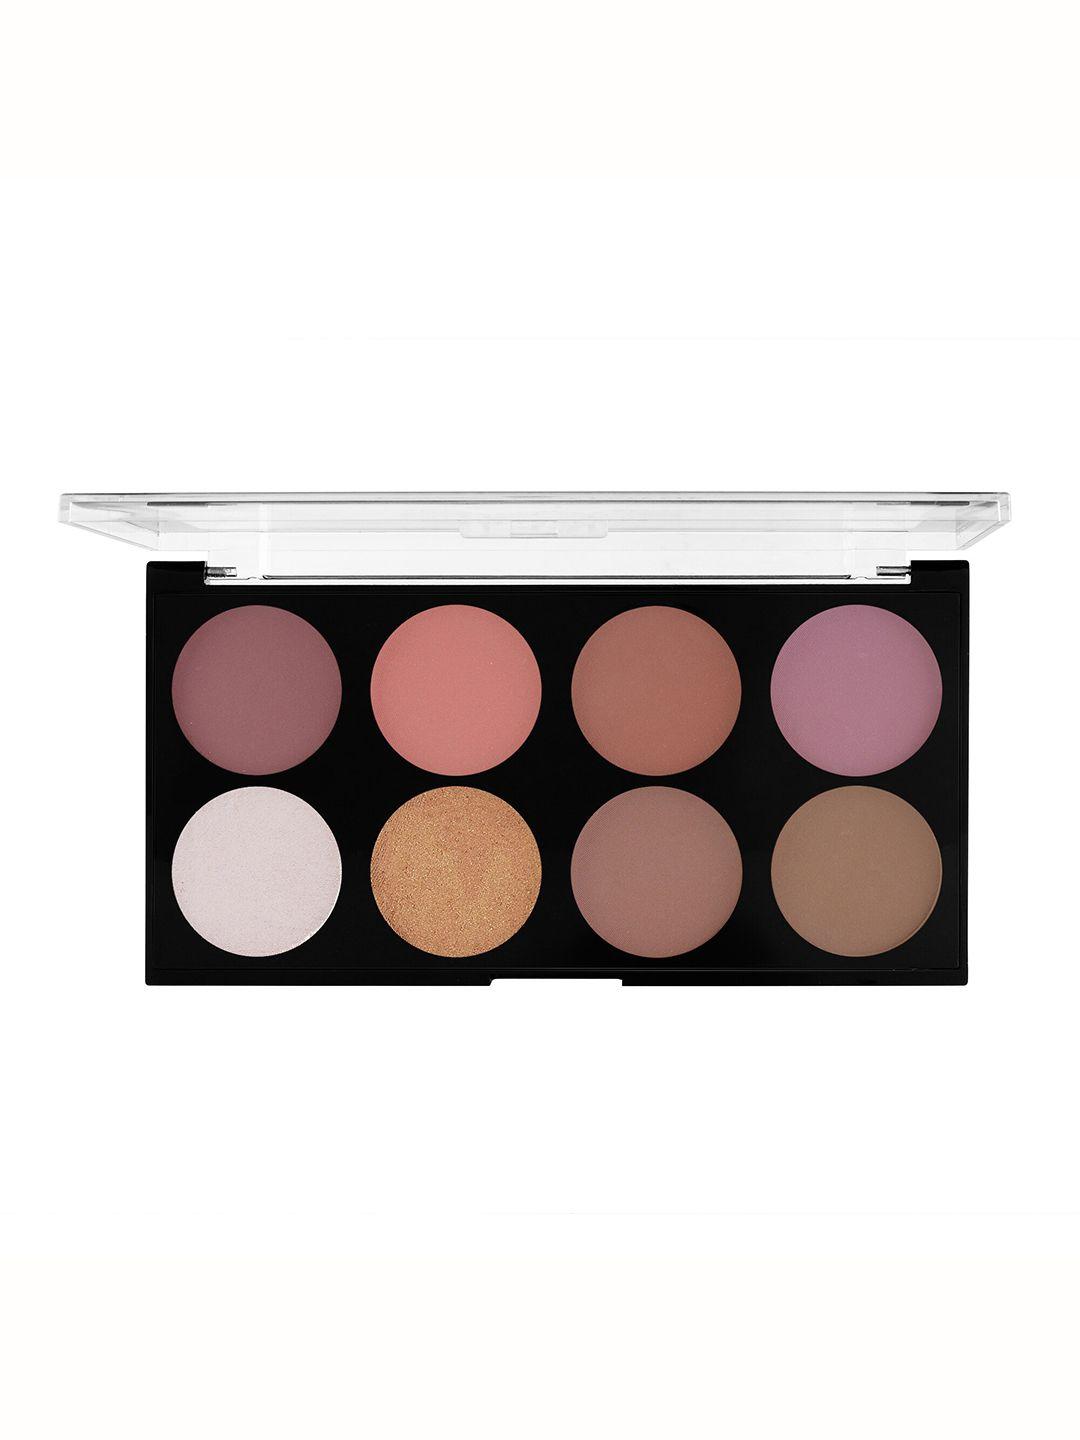 mars long-lasting & highly pigmented fantasy matte face blush palette - shade 03